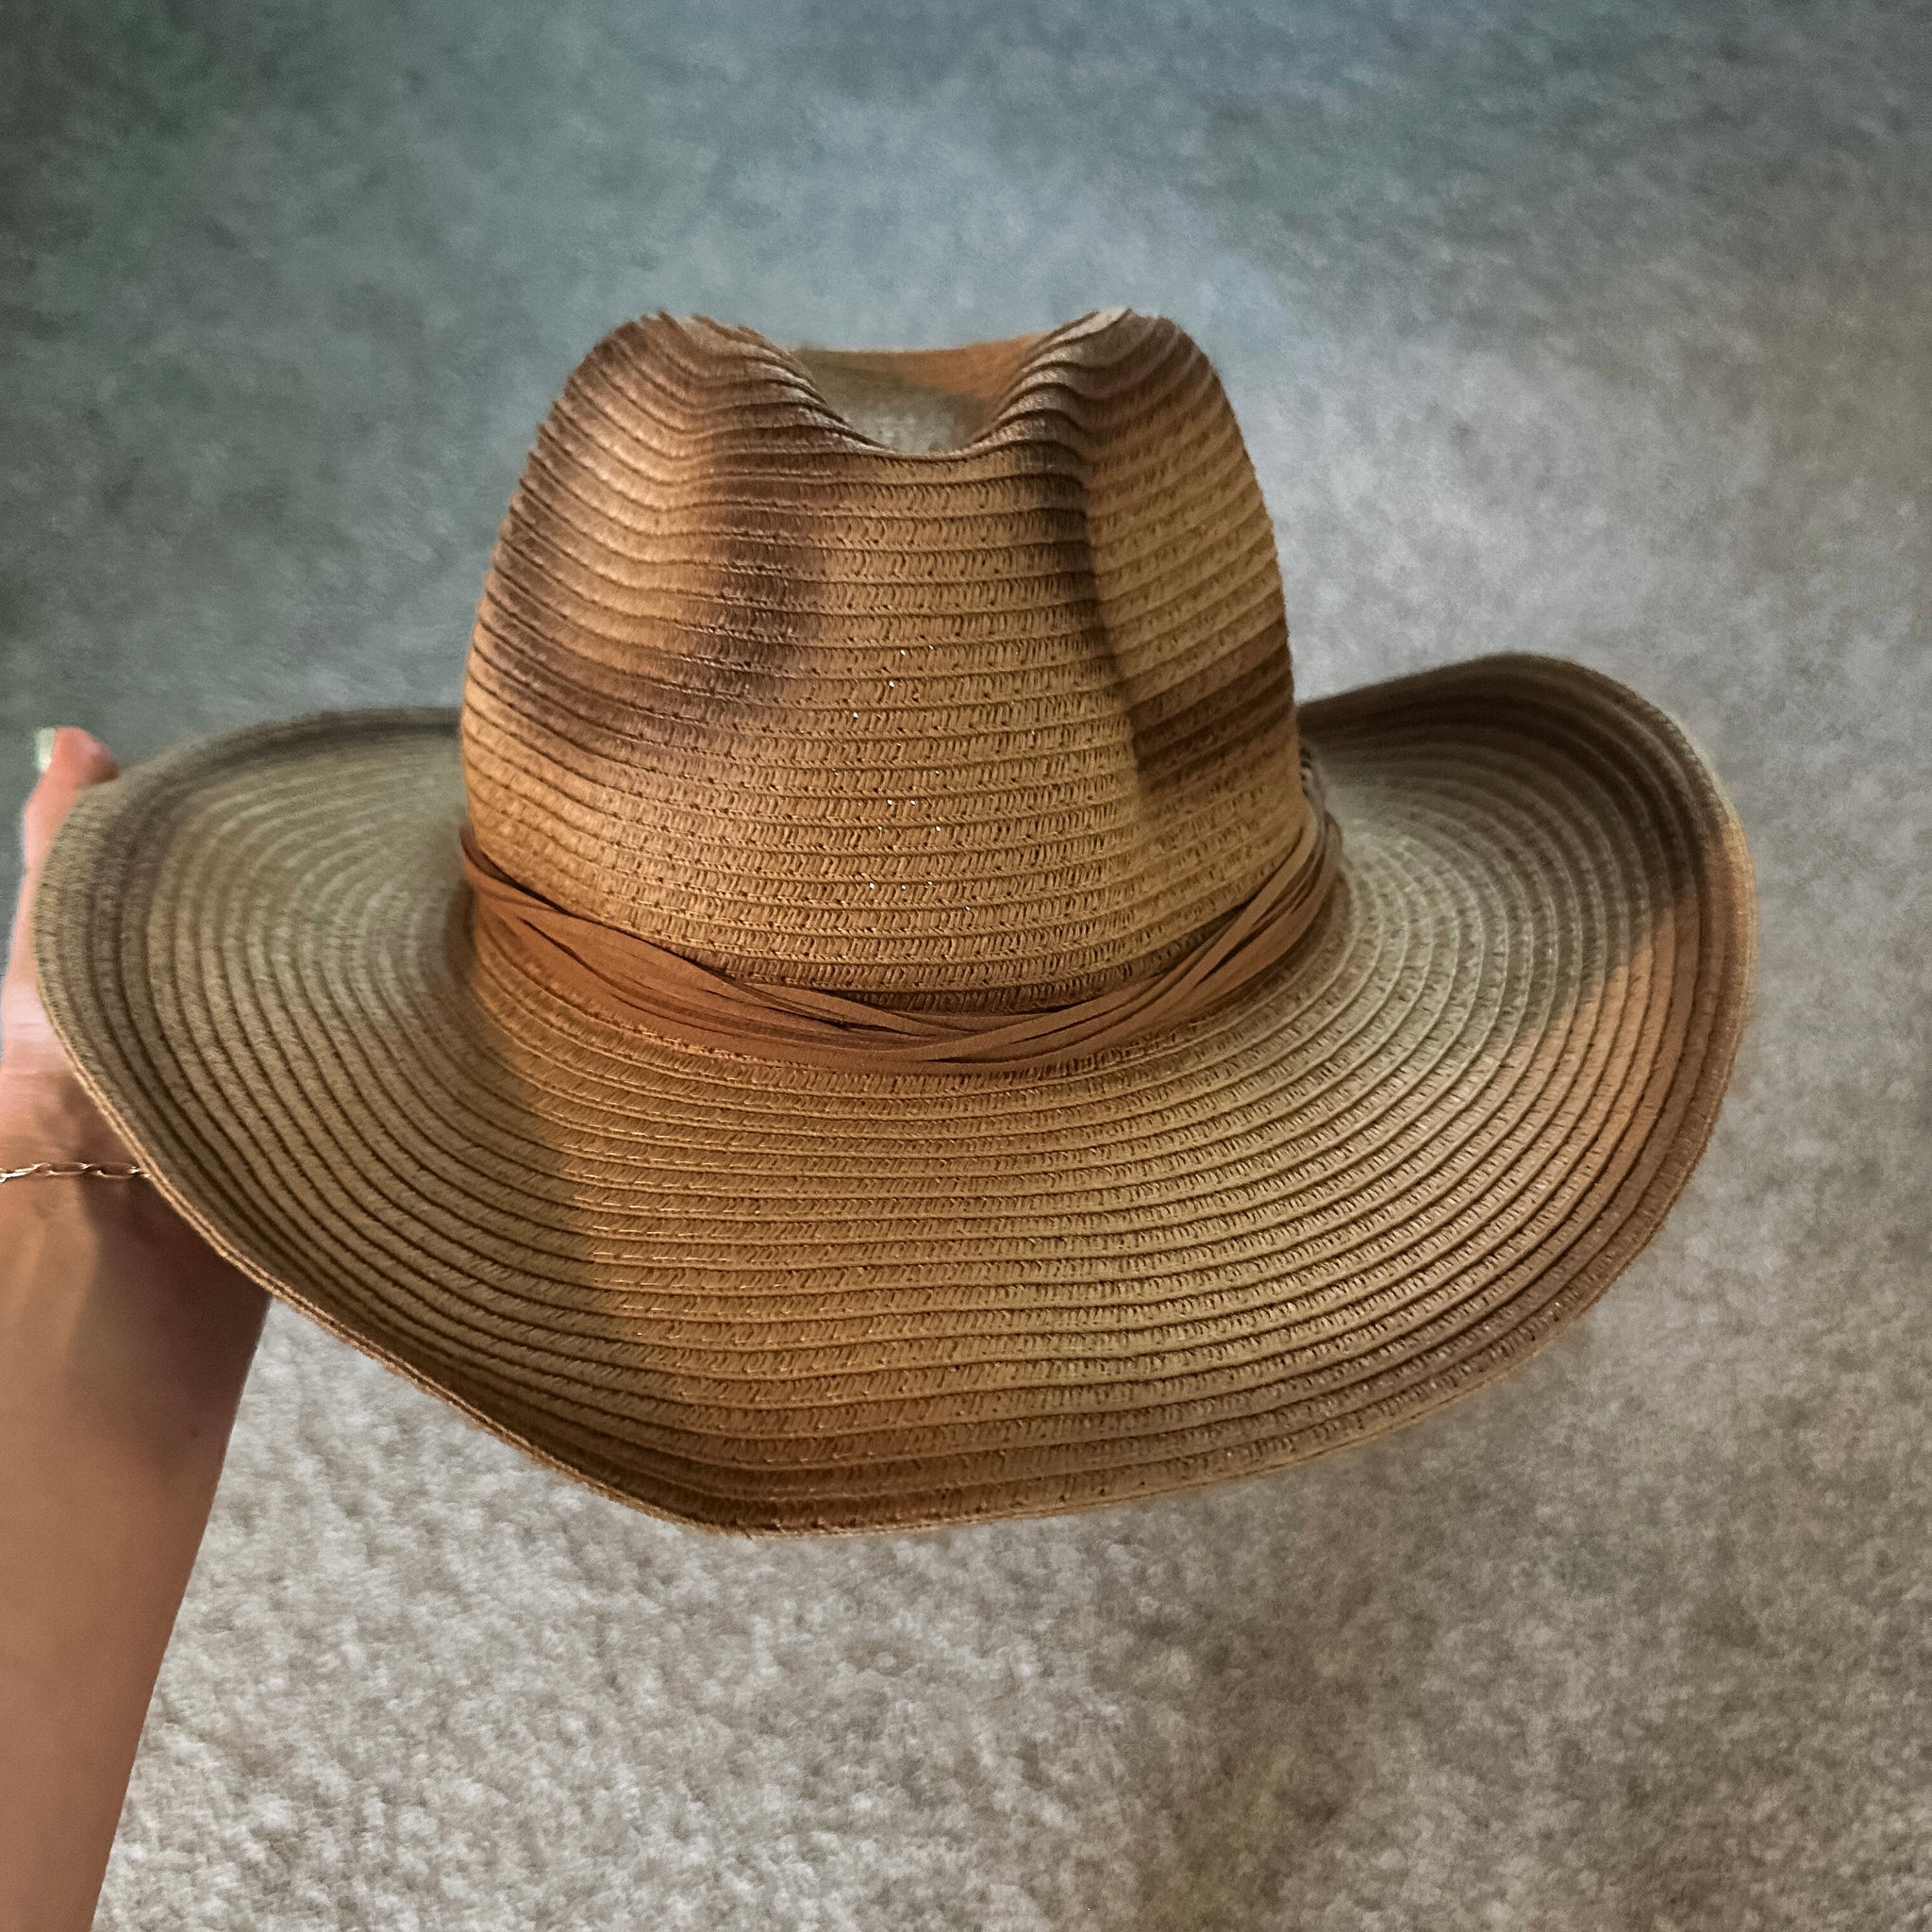 Summertime Cowgirl Hat